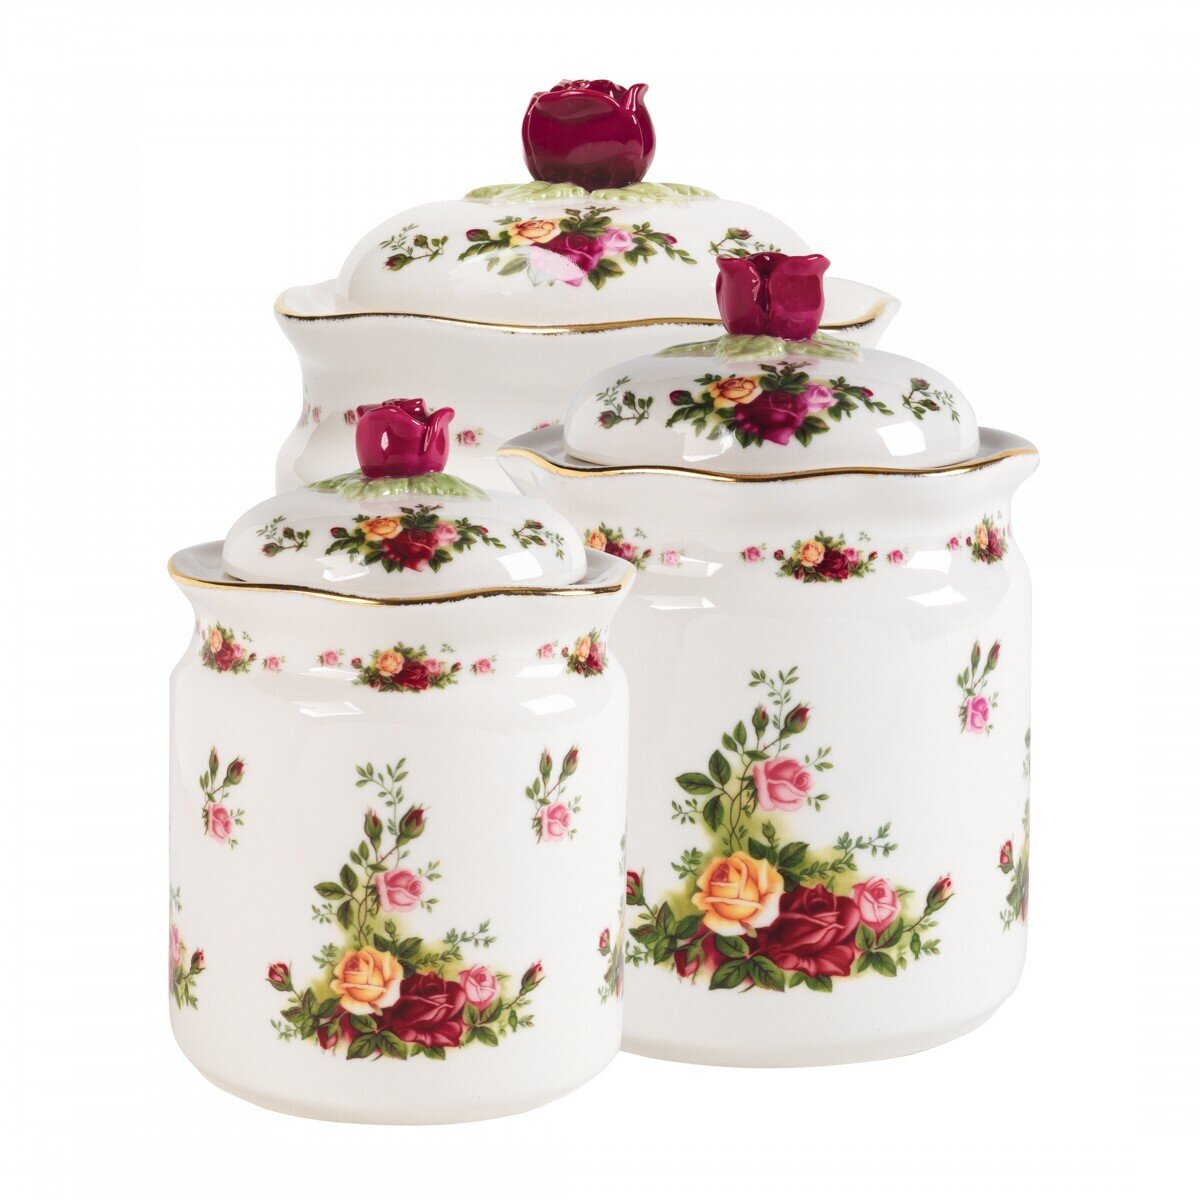 Royal Albert Old Country Roses Canisters Set of 3 24 Oz, 39 Oz, 56 Oz